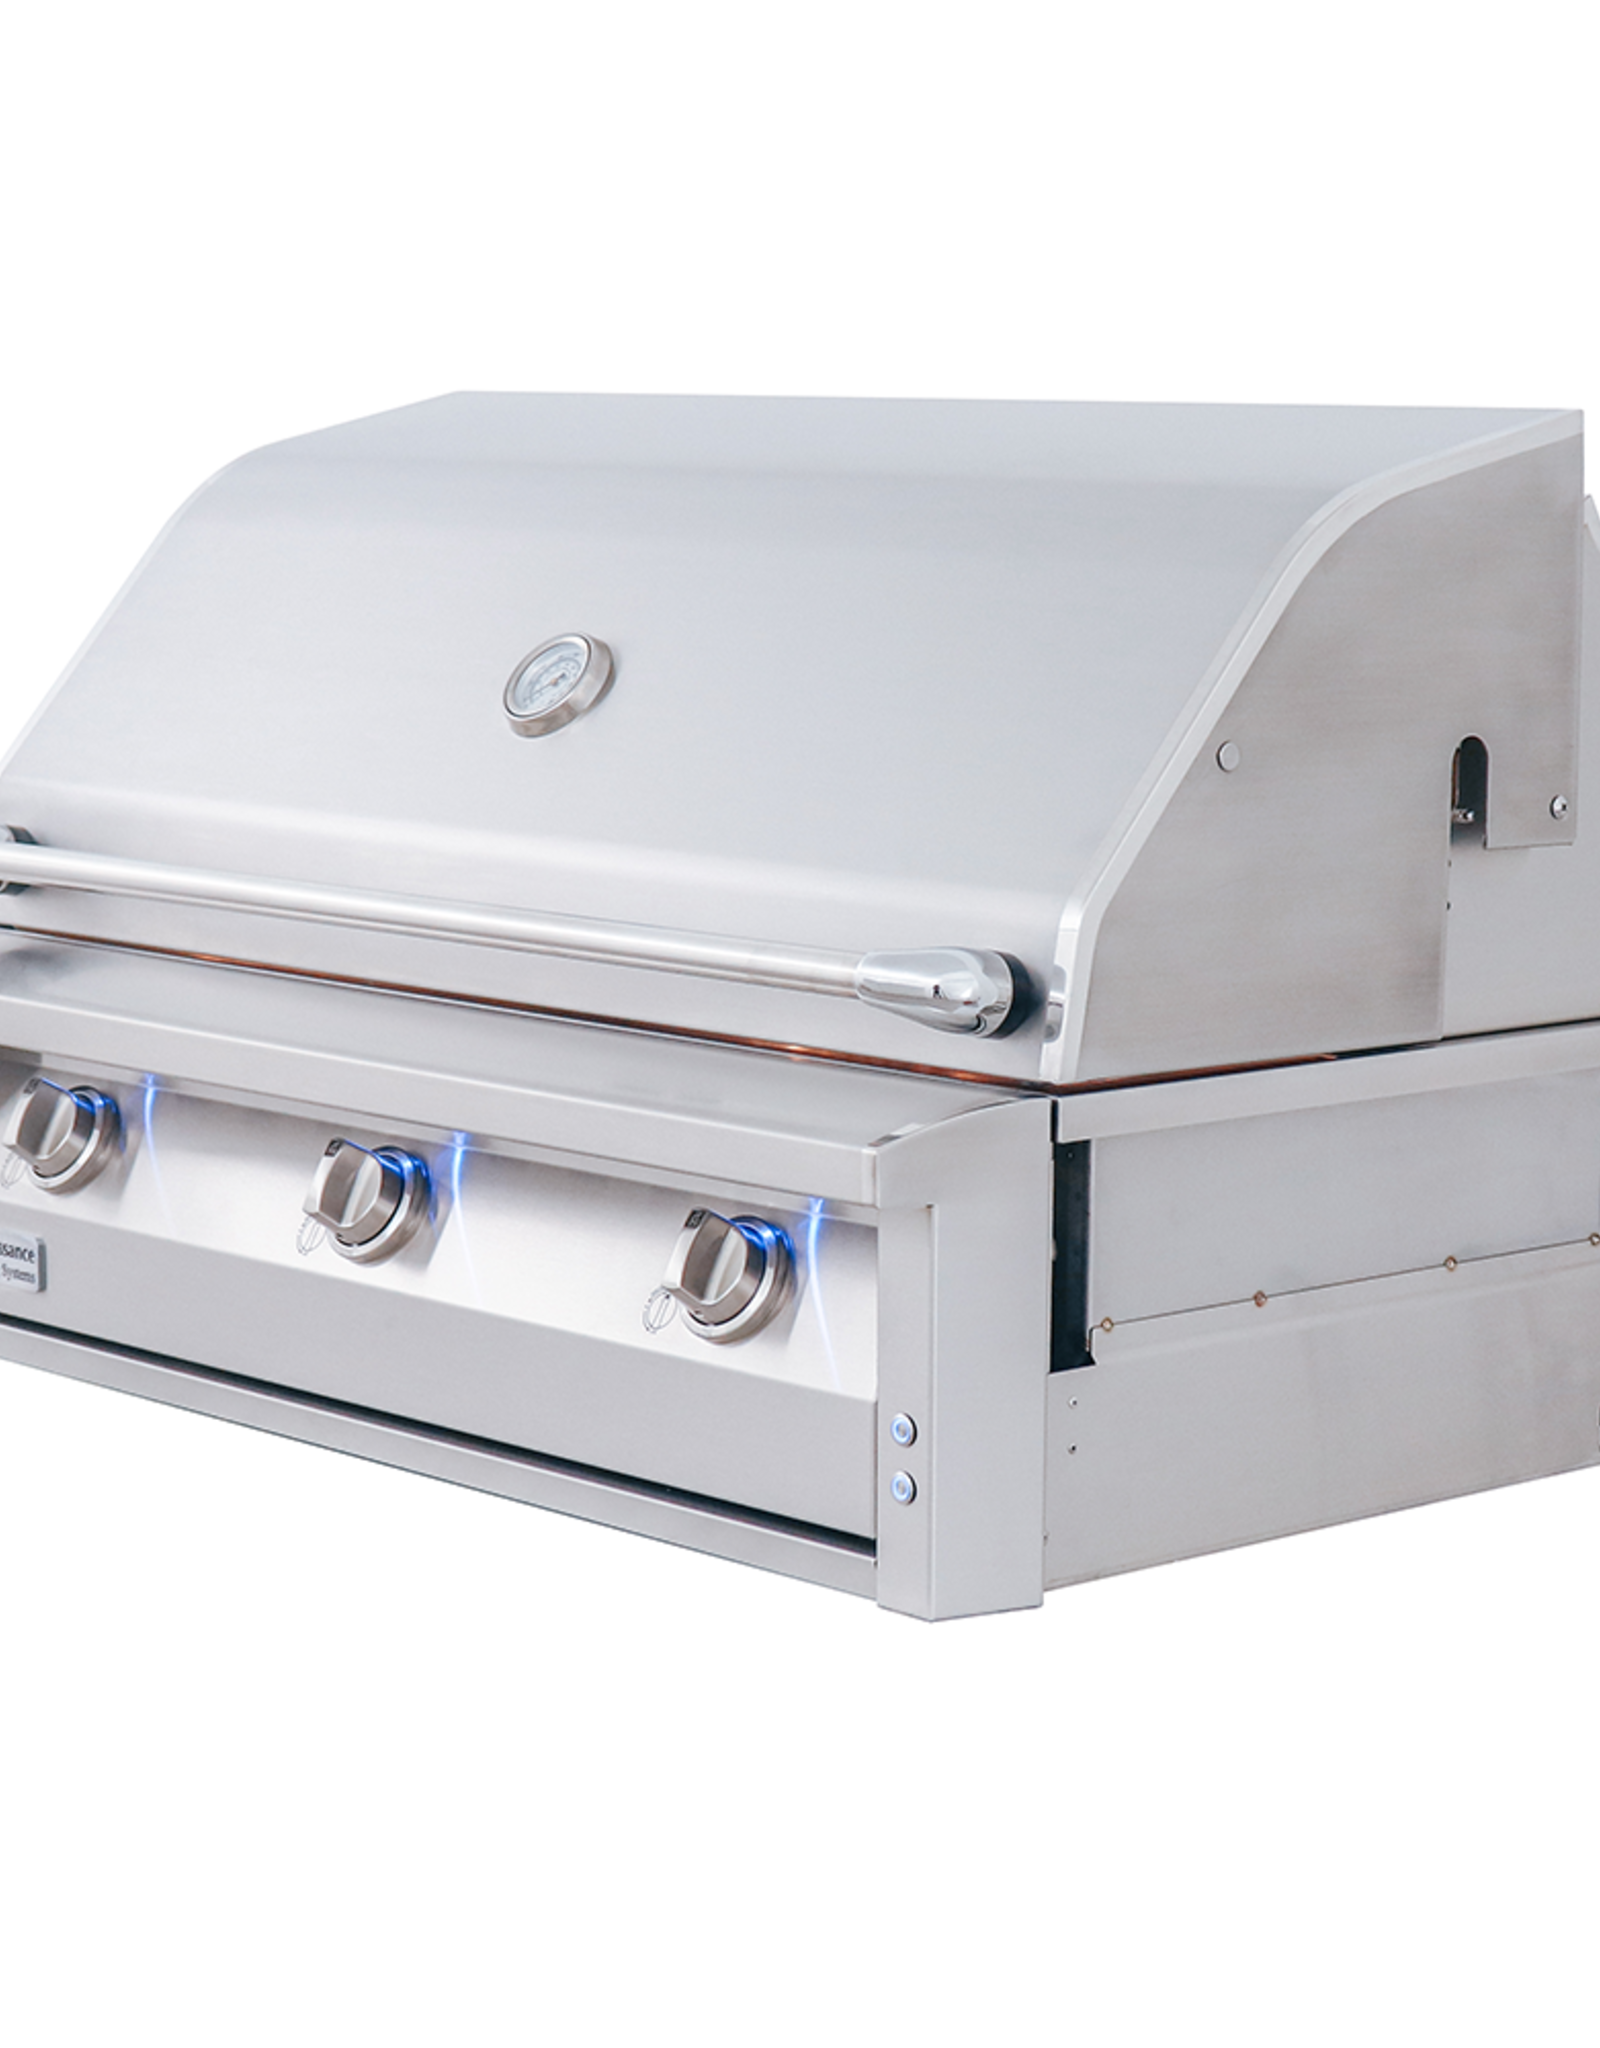 Renaissance Cooking Systems Renaissance Cooking Systems ARG 42" Drop-In Propane Grill - ARG42 LP